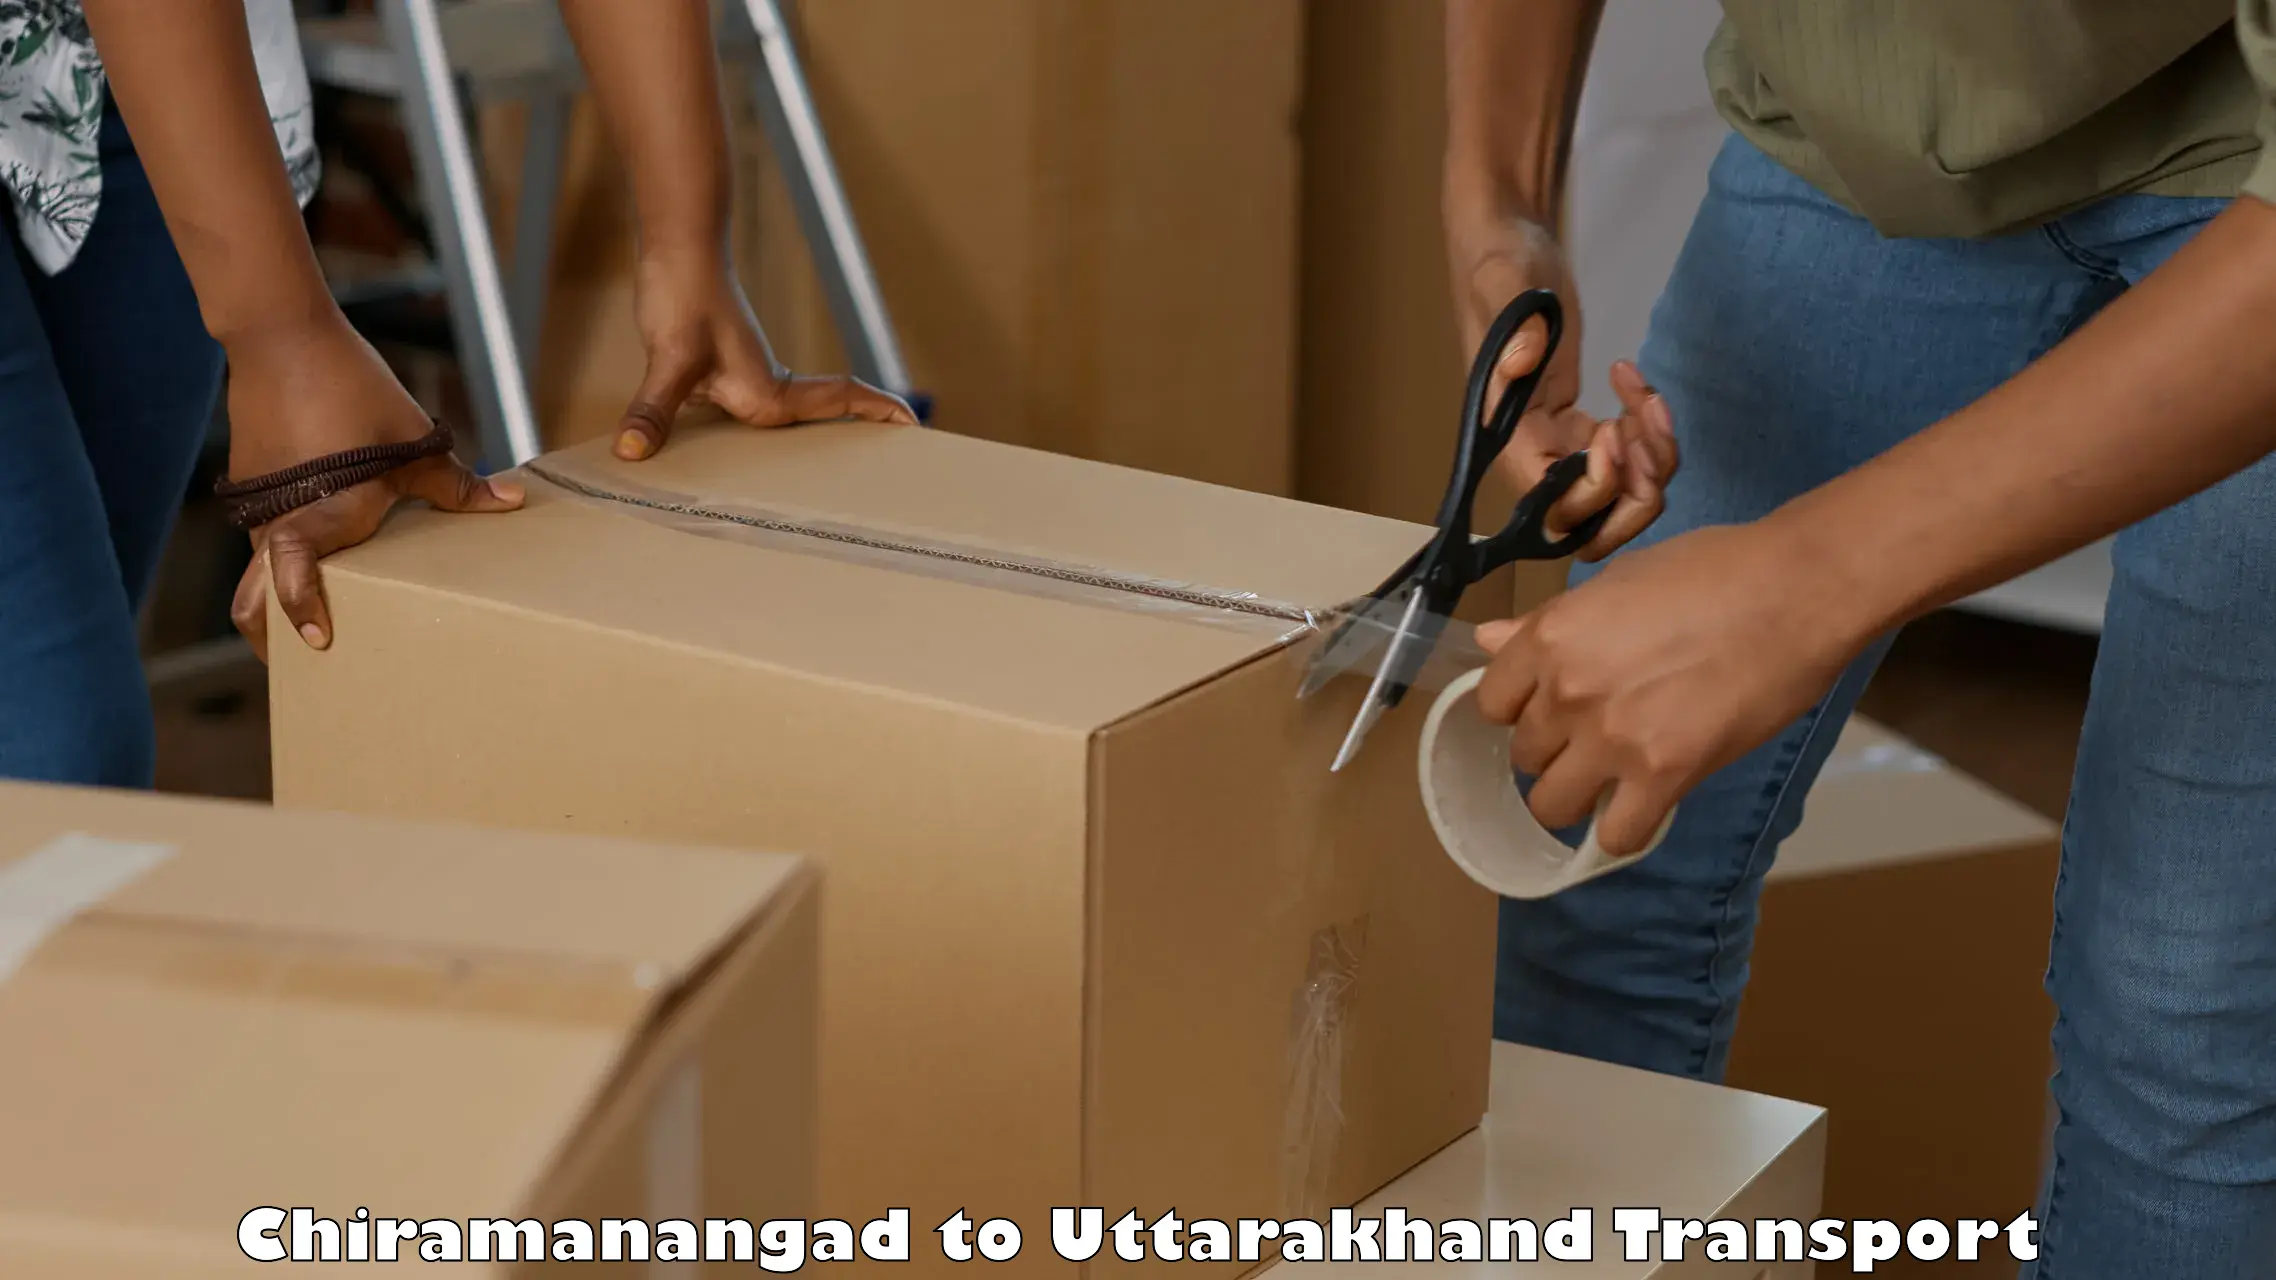 Part load transport service in India Chiramanangad to Pauri